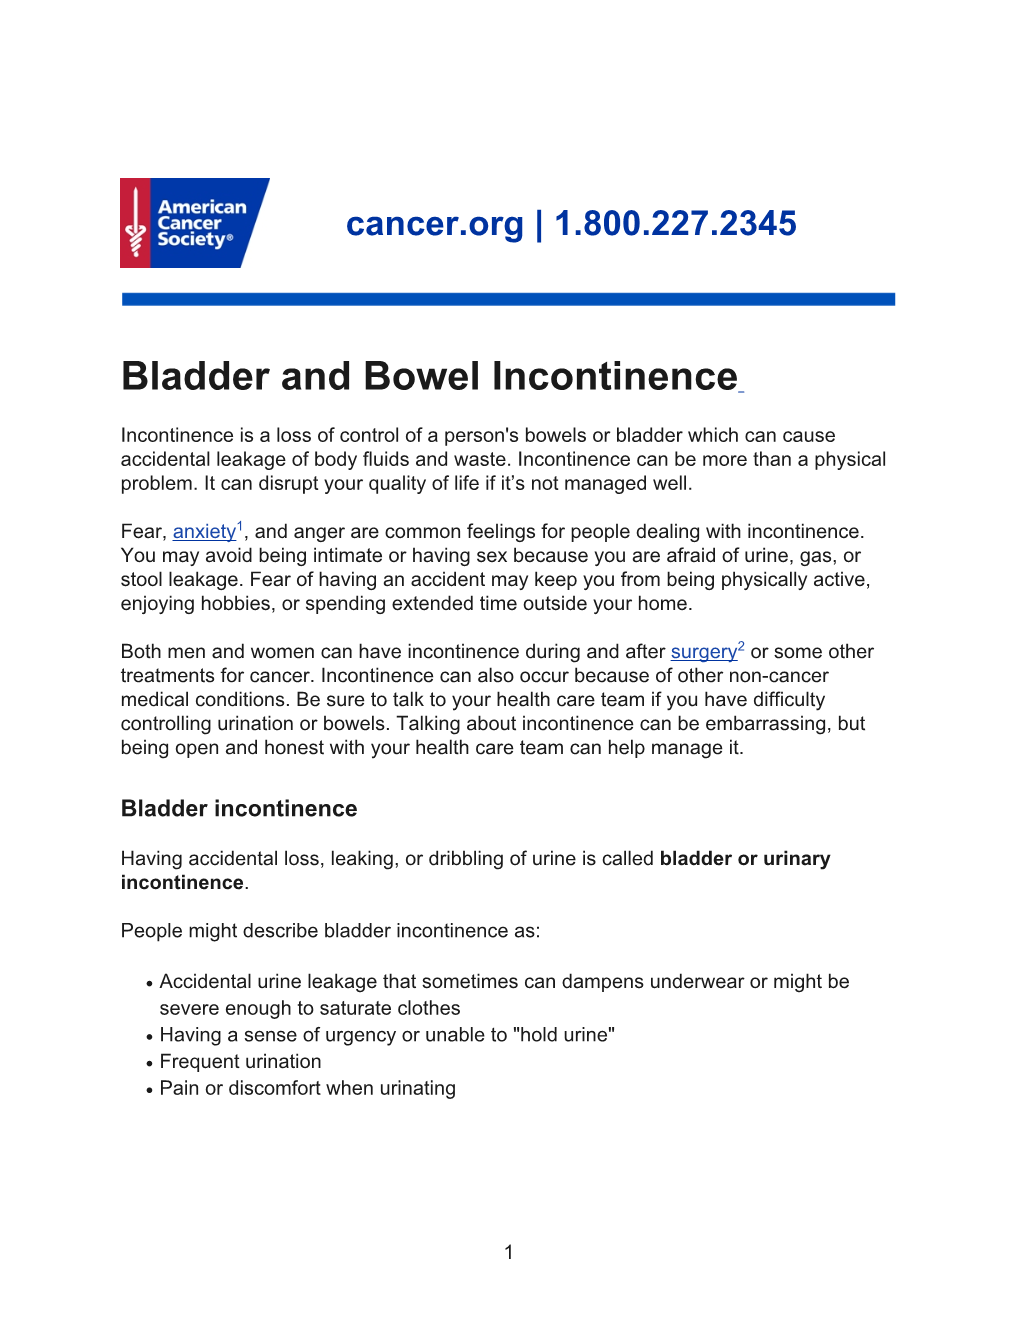 Bladder and Bowel Incontinence